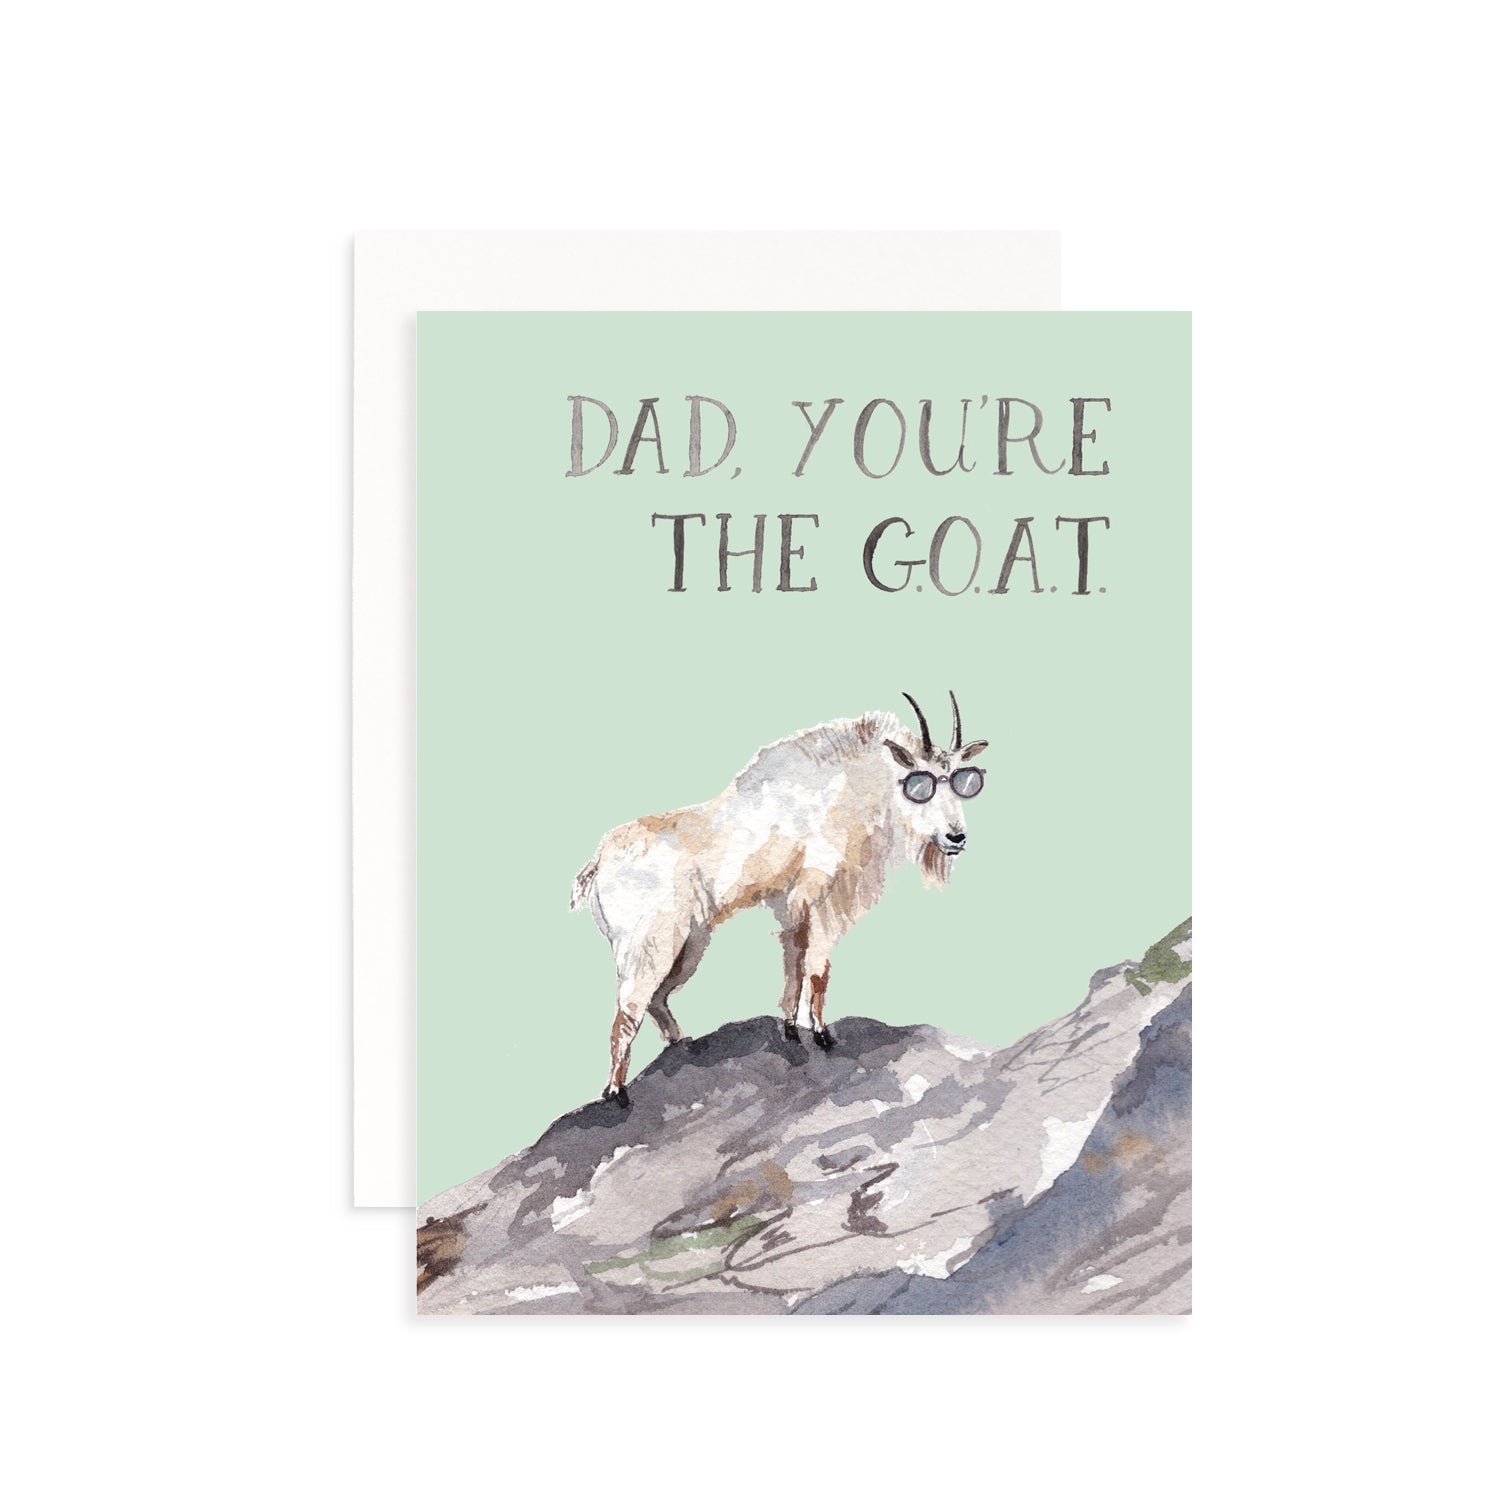 Dad, You're the G.O.A.T. Greeting Card